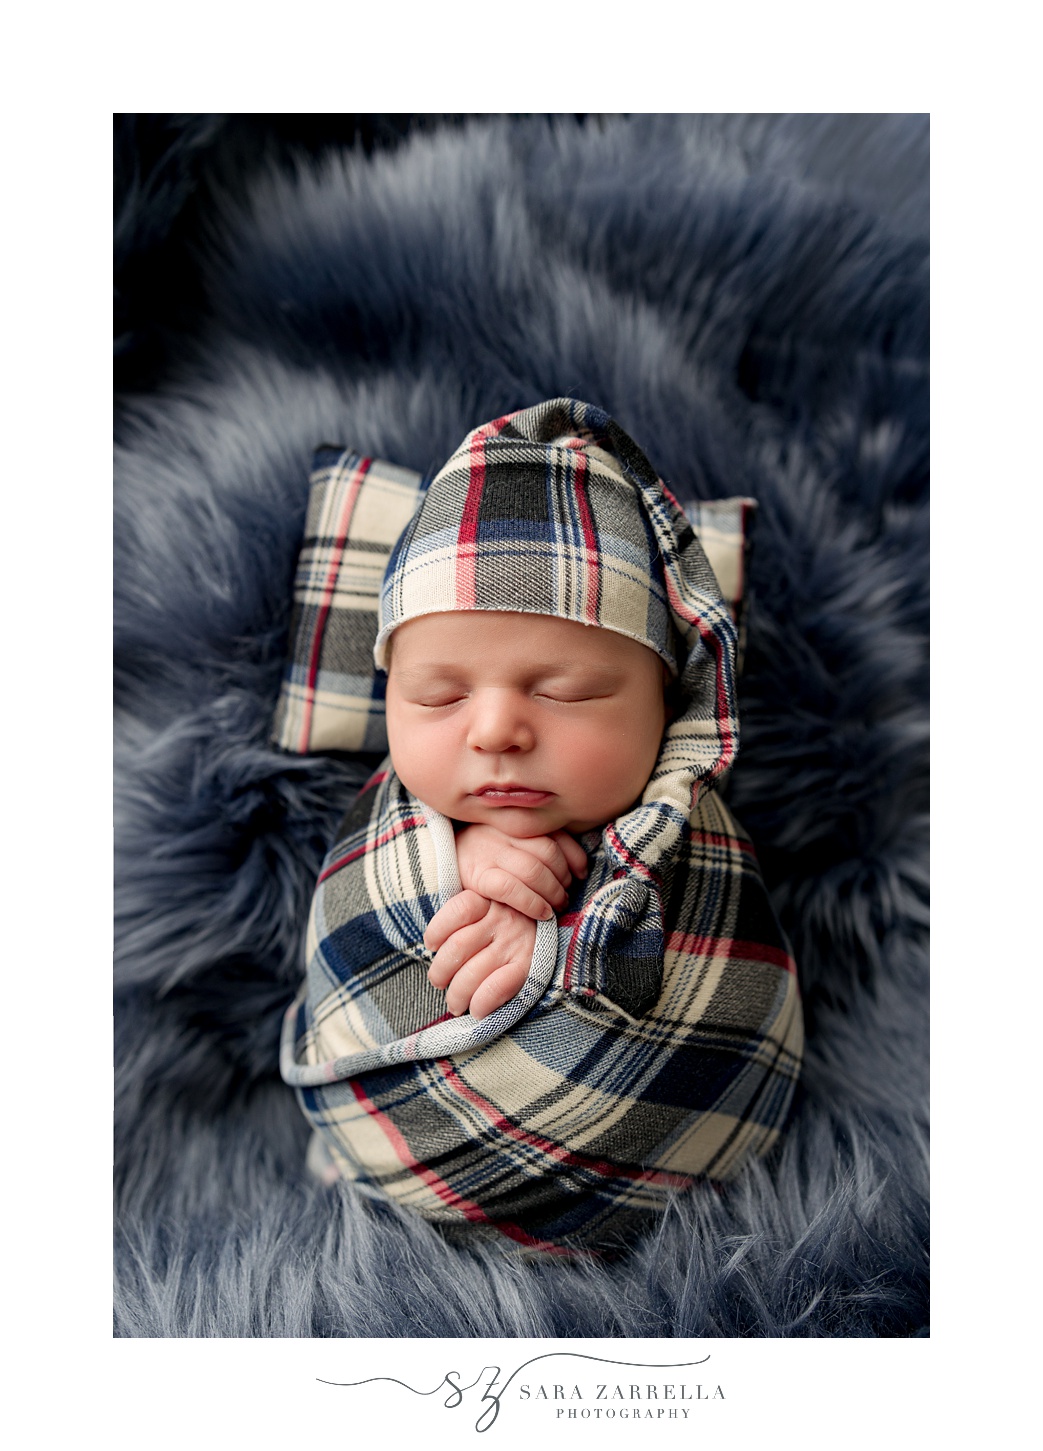 baby lays on fuzzy blue blanket in plaid wrap during newborn session with Rhode Island newborn and family photographer Sara Zarrella Photography